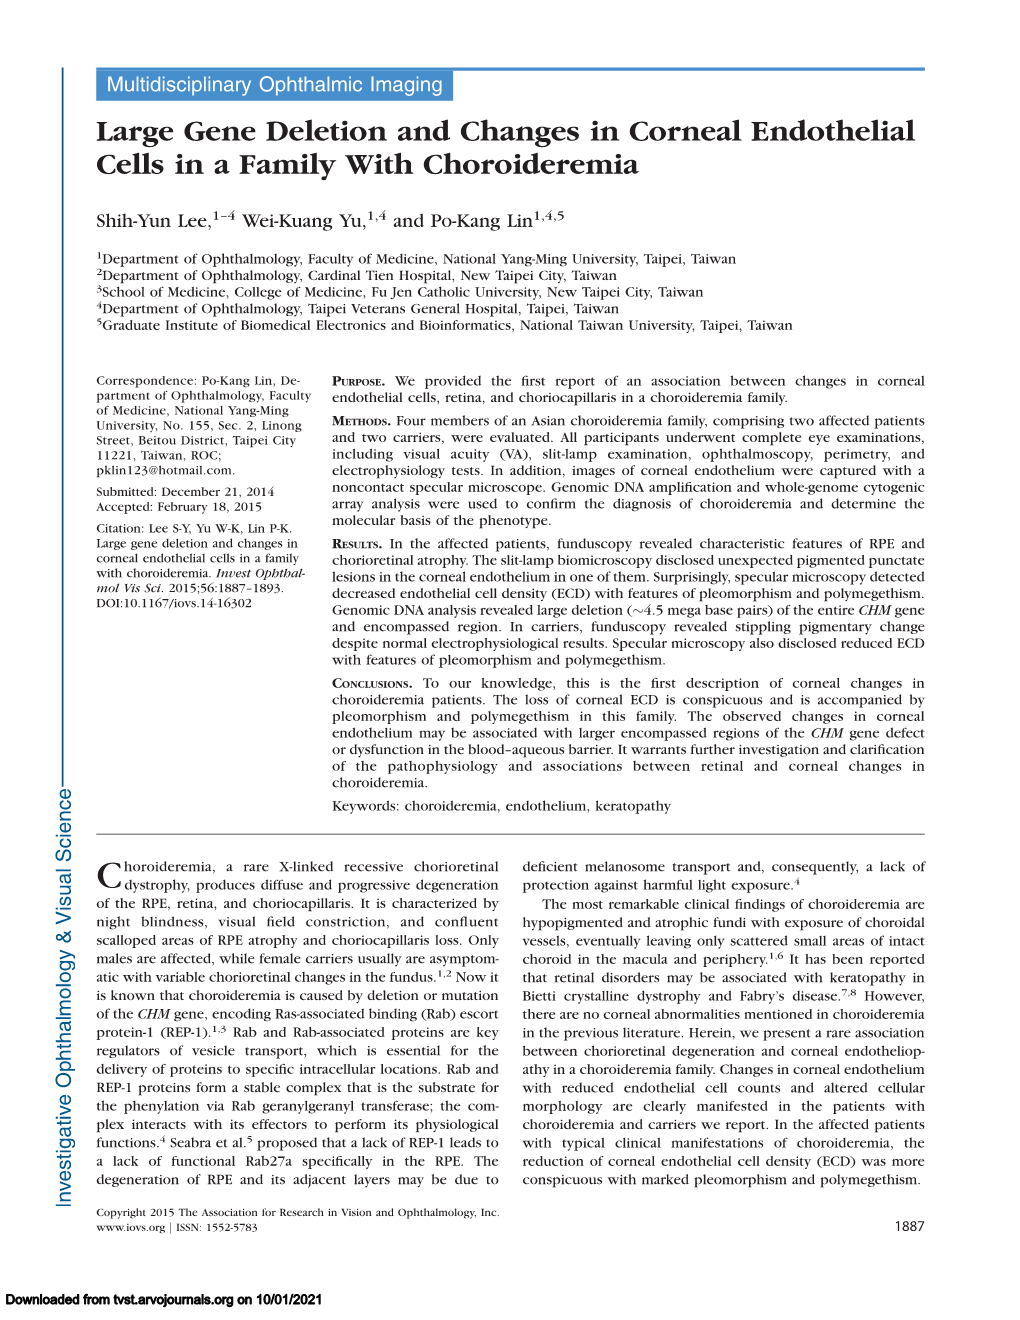 Large Gene Deletion and Changes in Corneal Endothelial Cells in a Family with Choroideremia